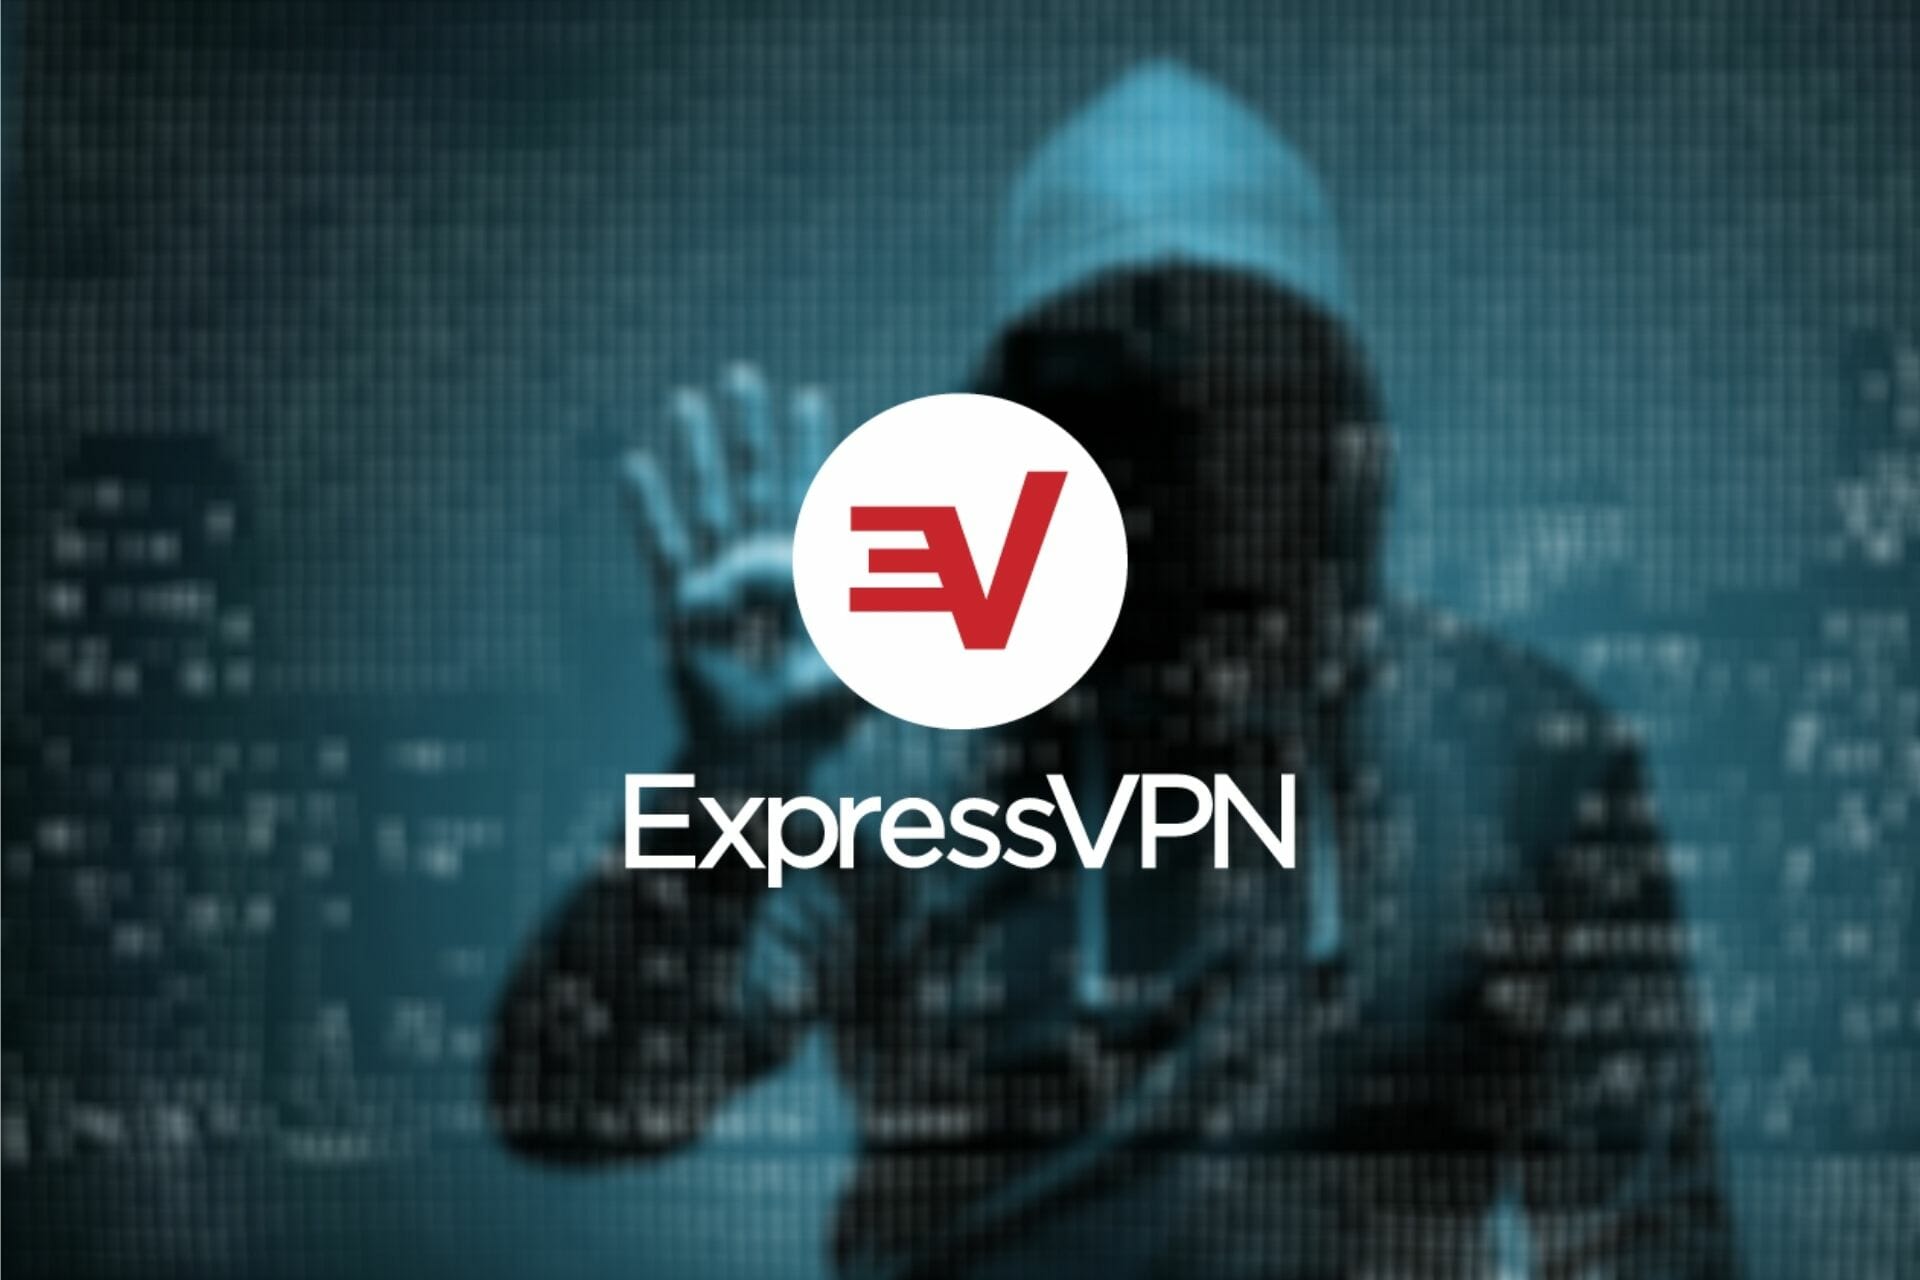 Can ExpressVPN be hacked?